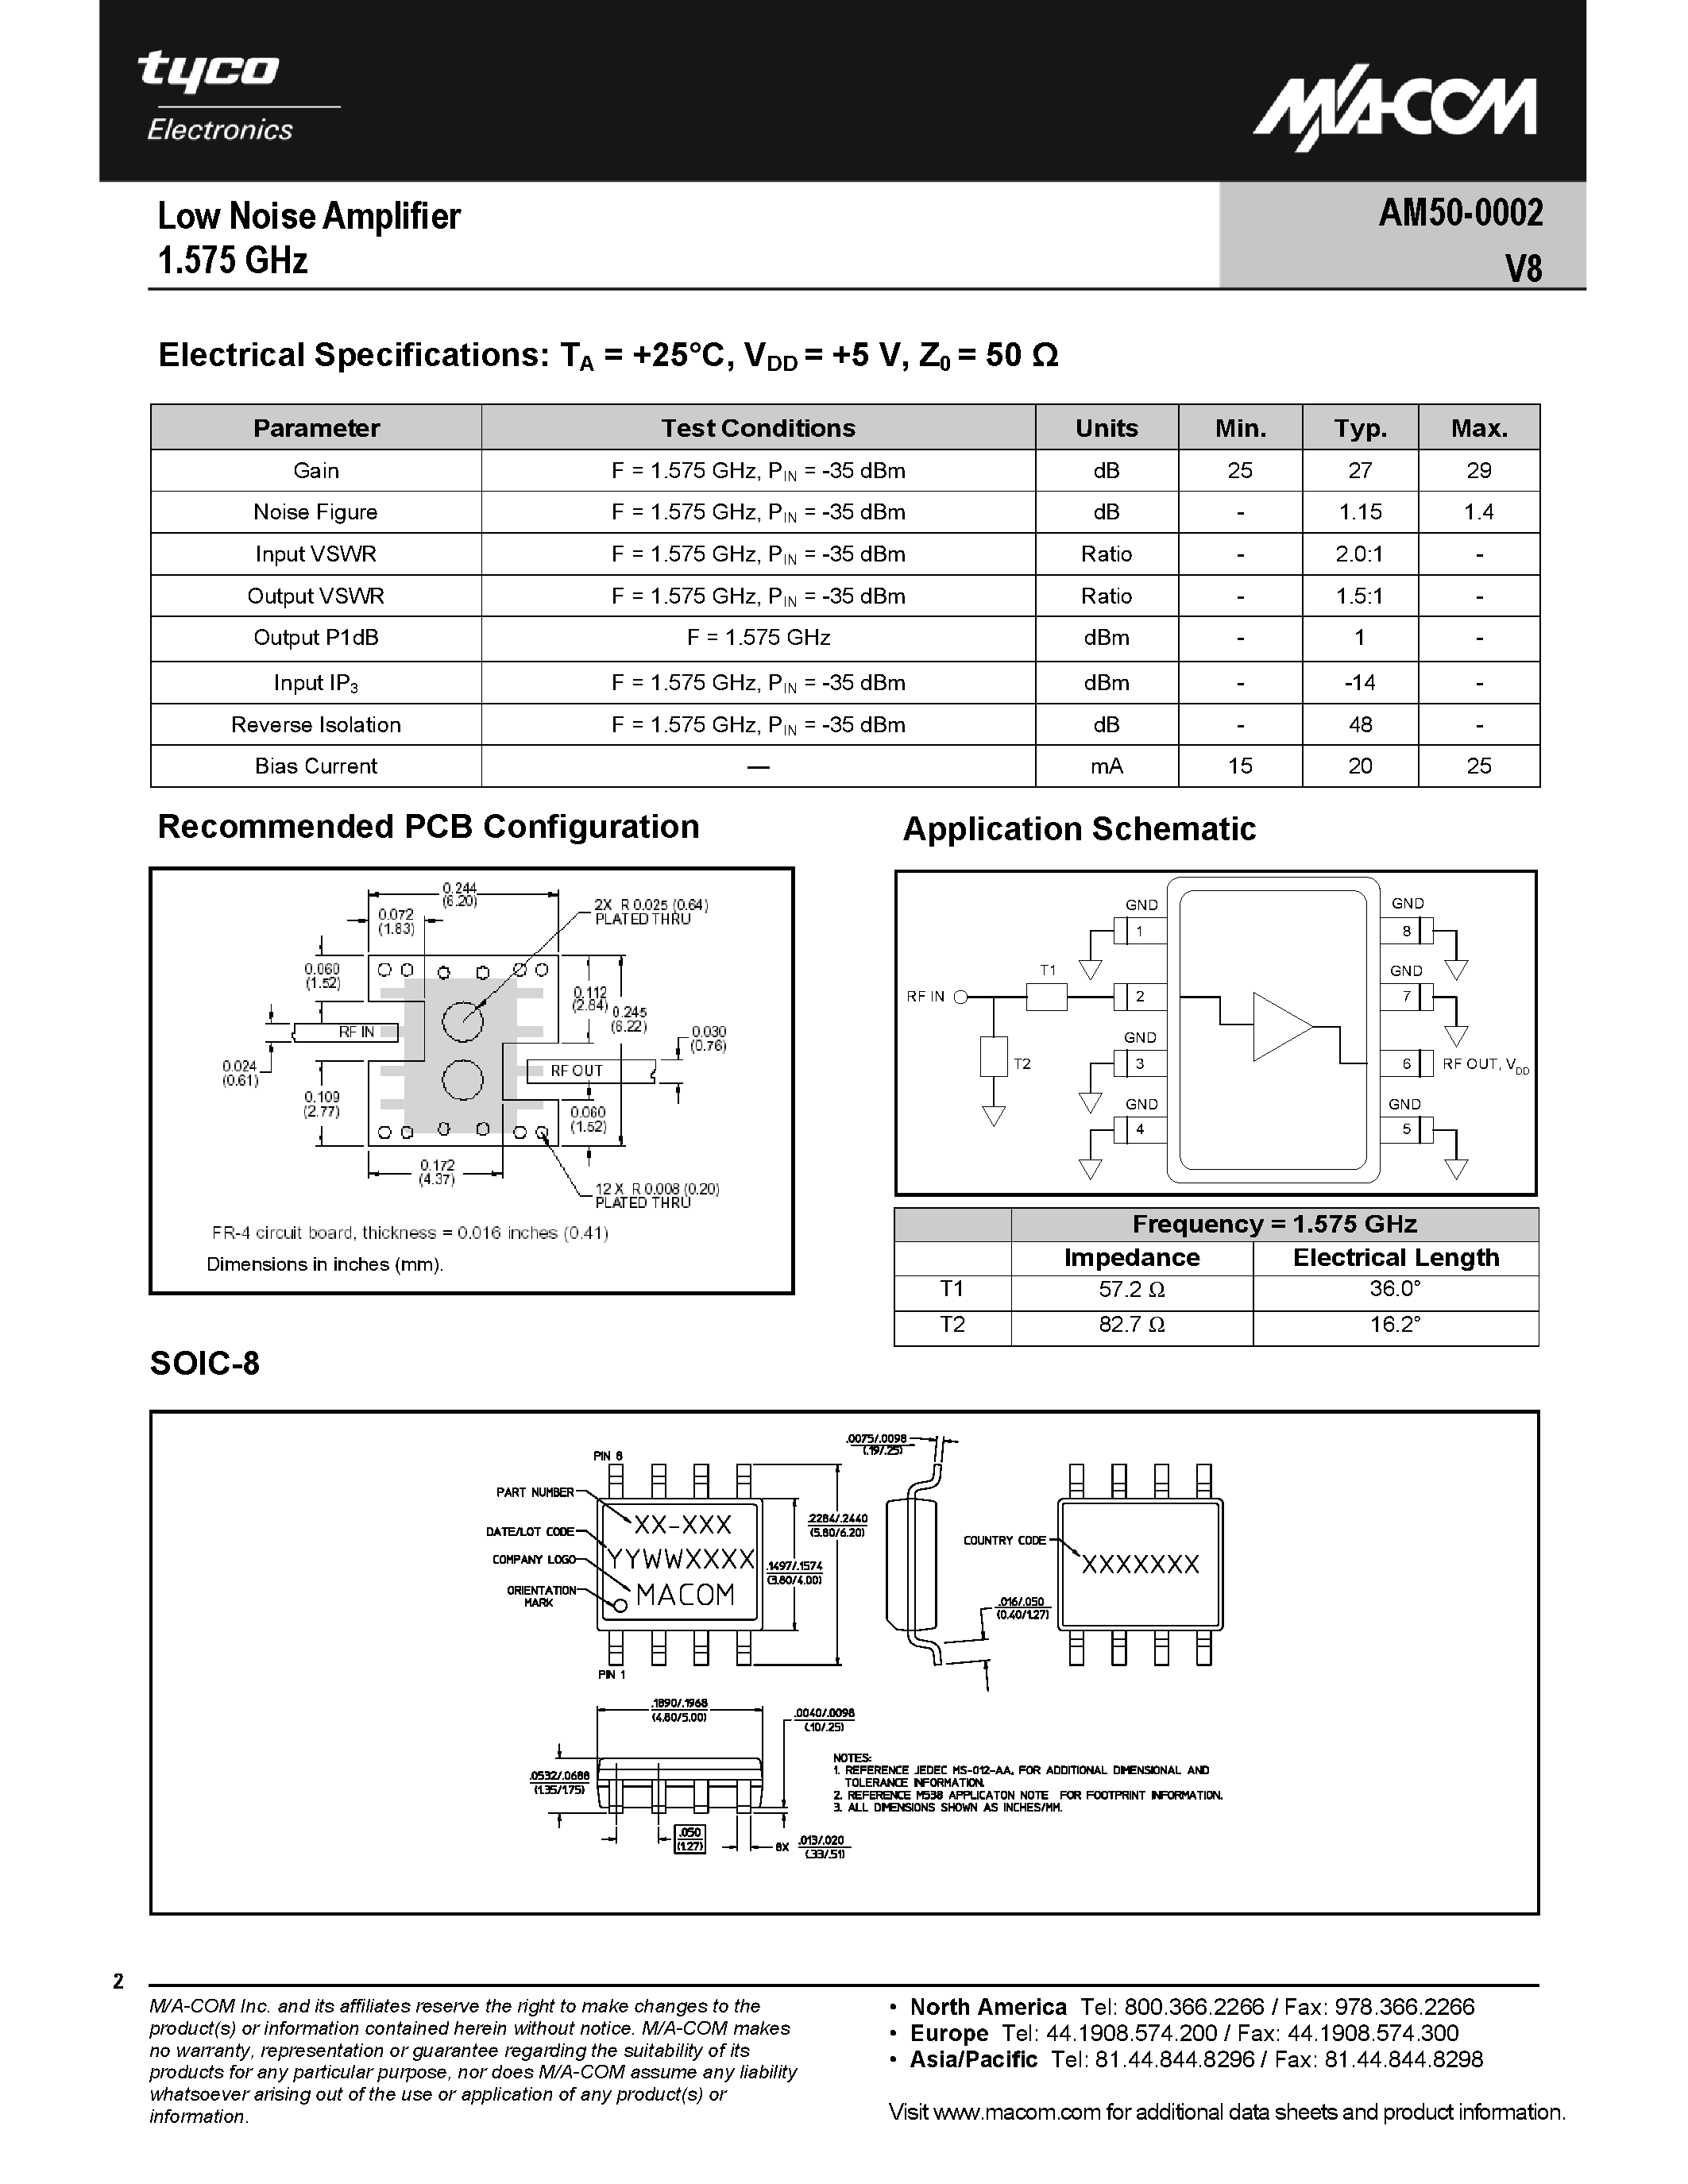 Datasheet AM50-0002V8 - Low Noise Amplifier page 2